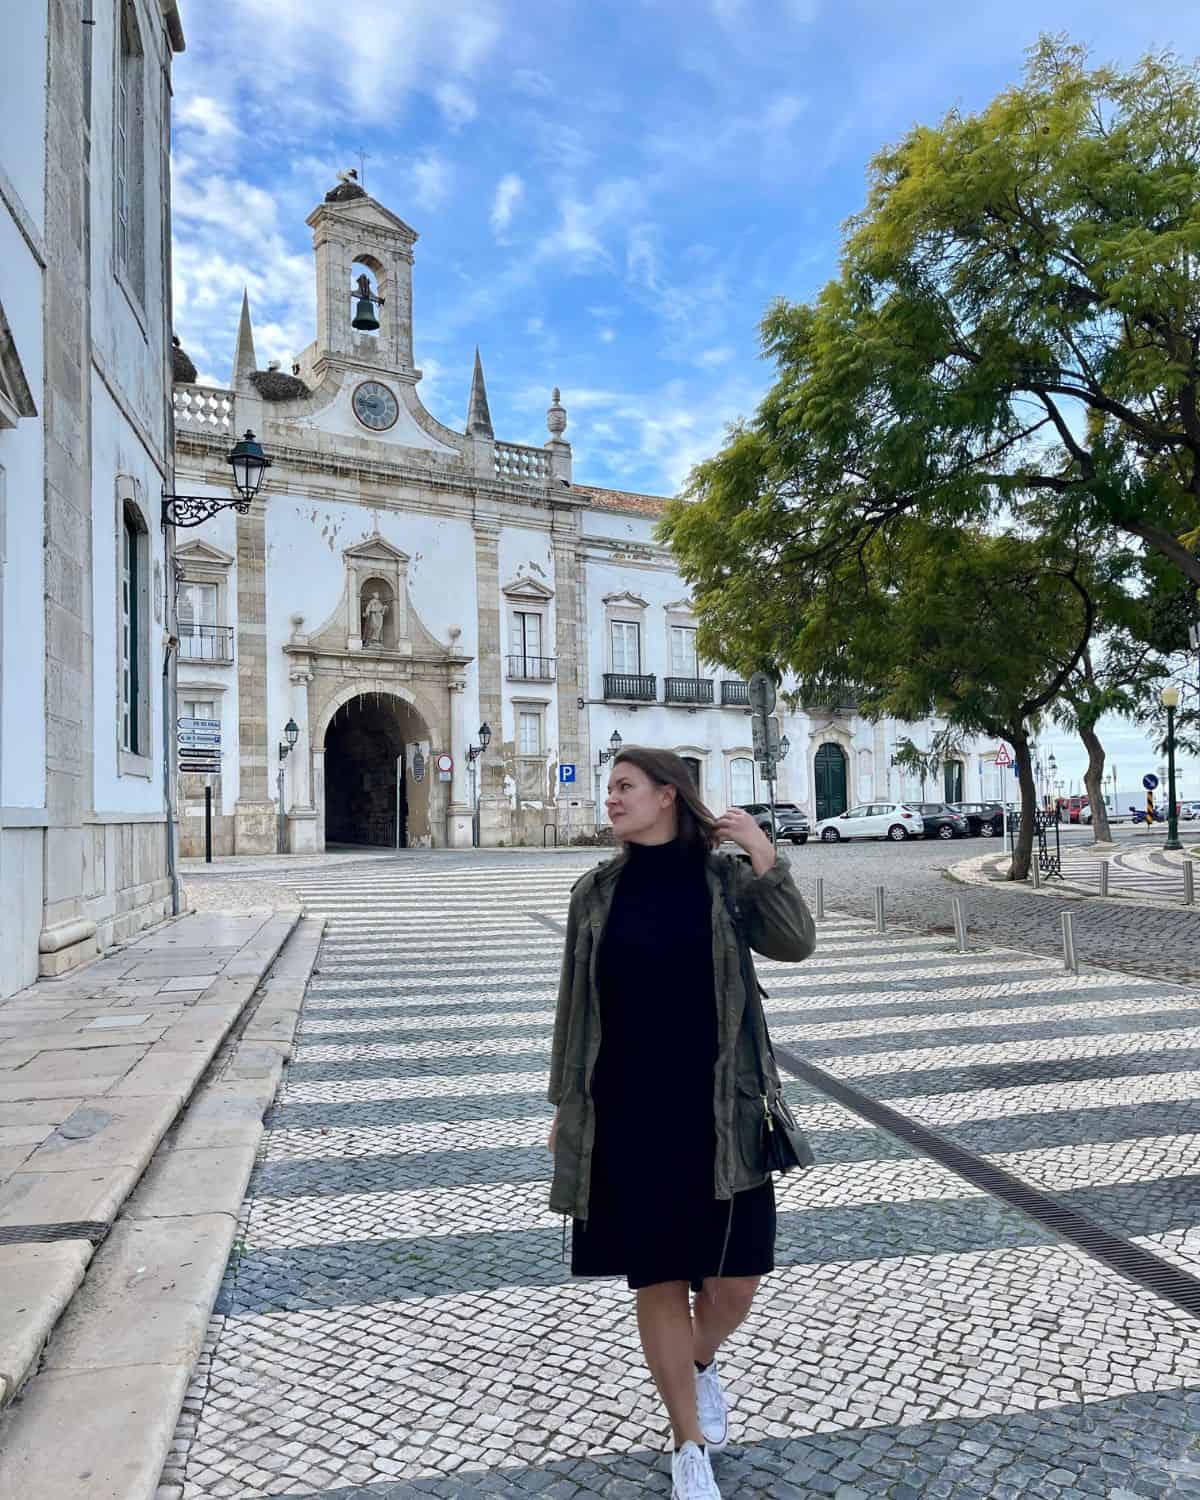 A solo traveler in a black dress and green jacket stands on a cobbled street, looking to the side with an air of anticipation. Behind her, a beautifully detailed white building with Baroque elements stands under a cloudy sky. The deserted street emphasizes the quiet and introspective nature of traveling alone.